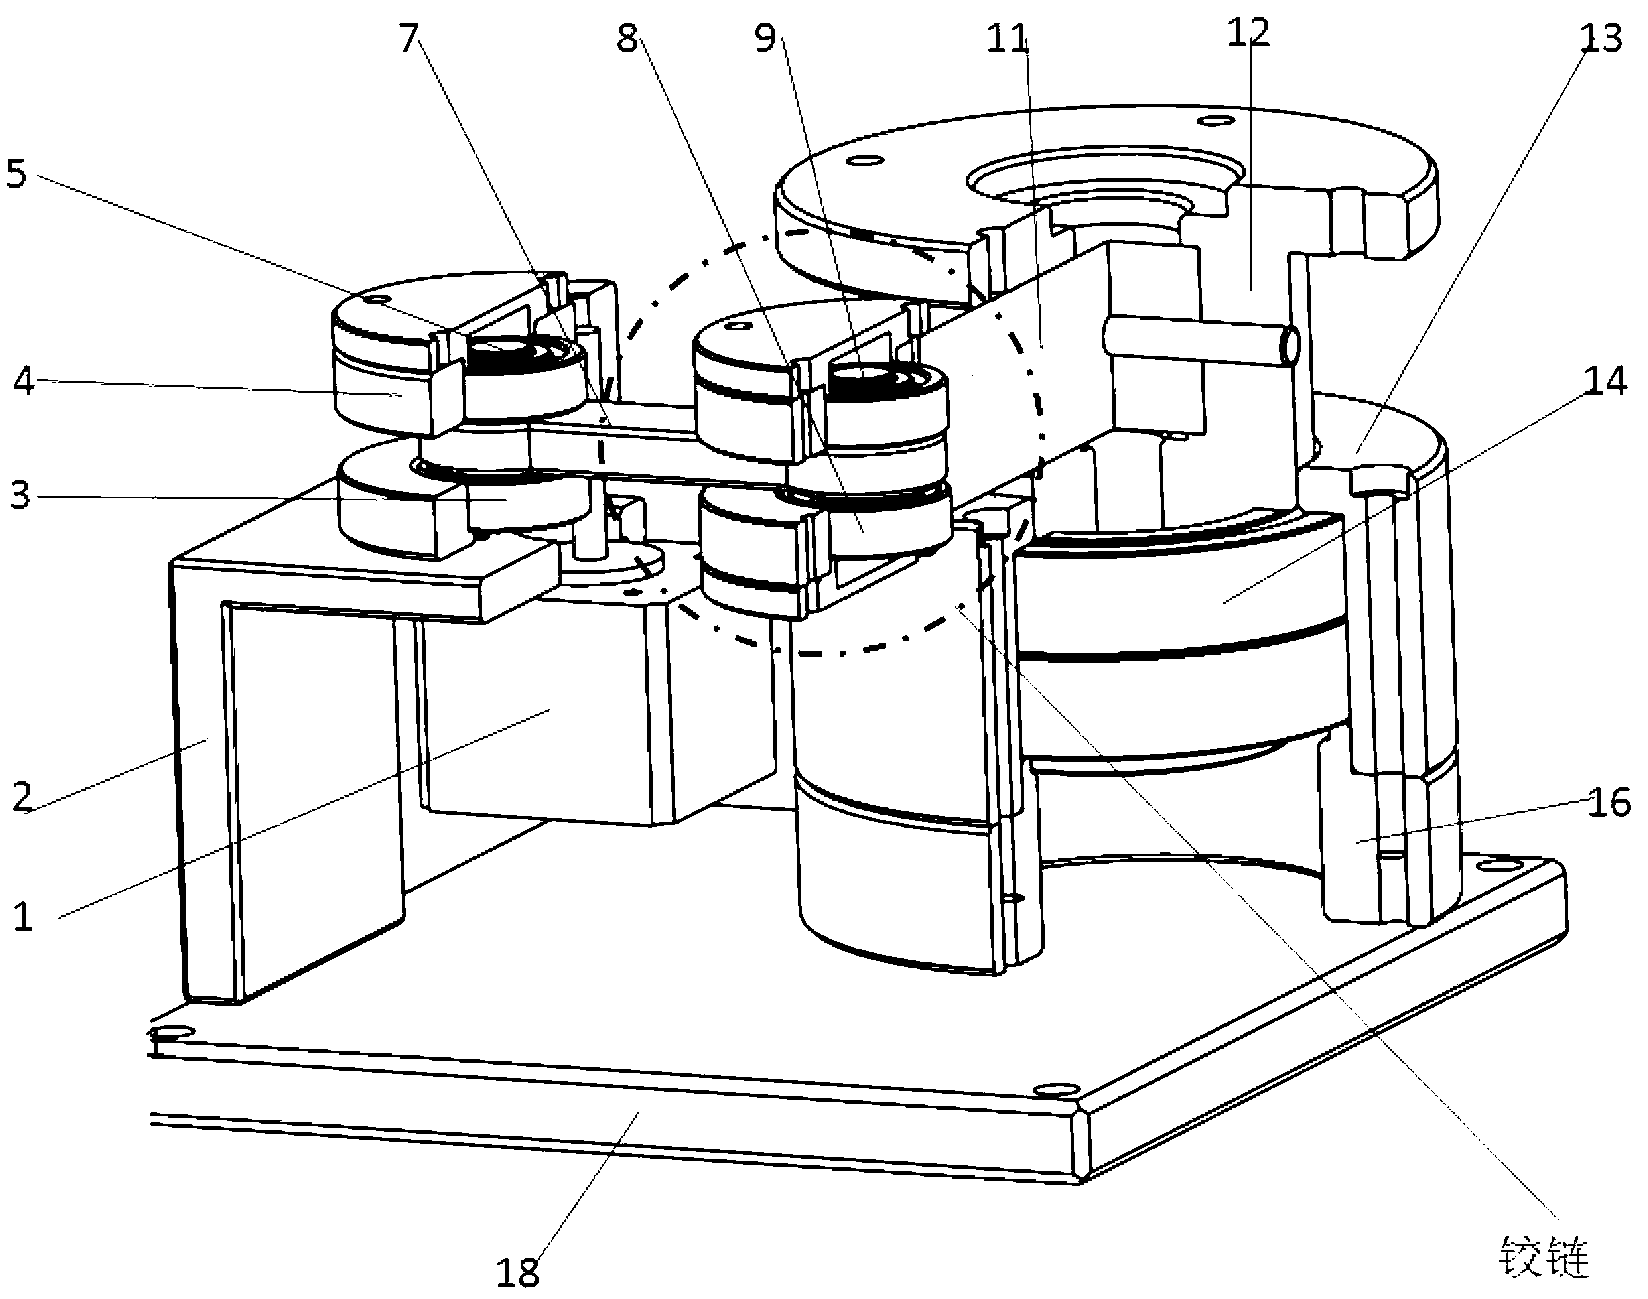 High-precision rotary table of gapless connecting rod mechanism and capable of moving slightly